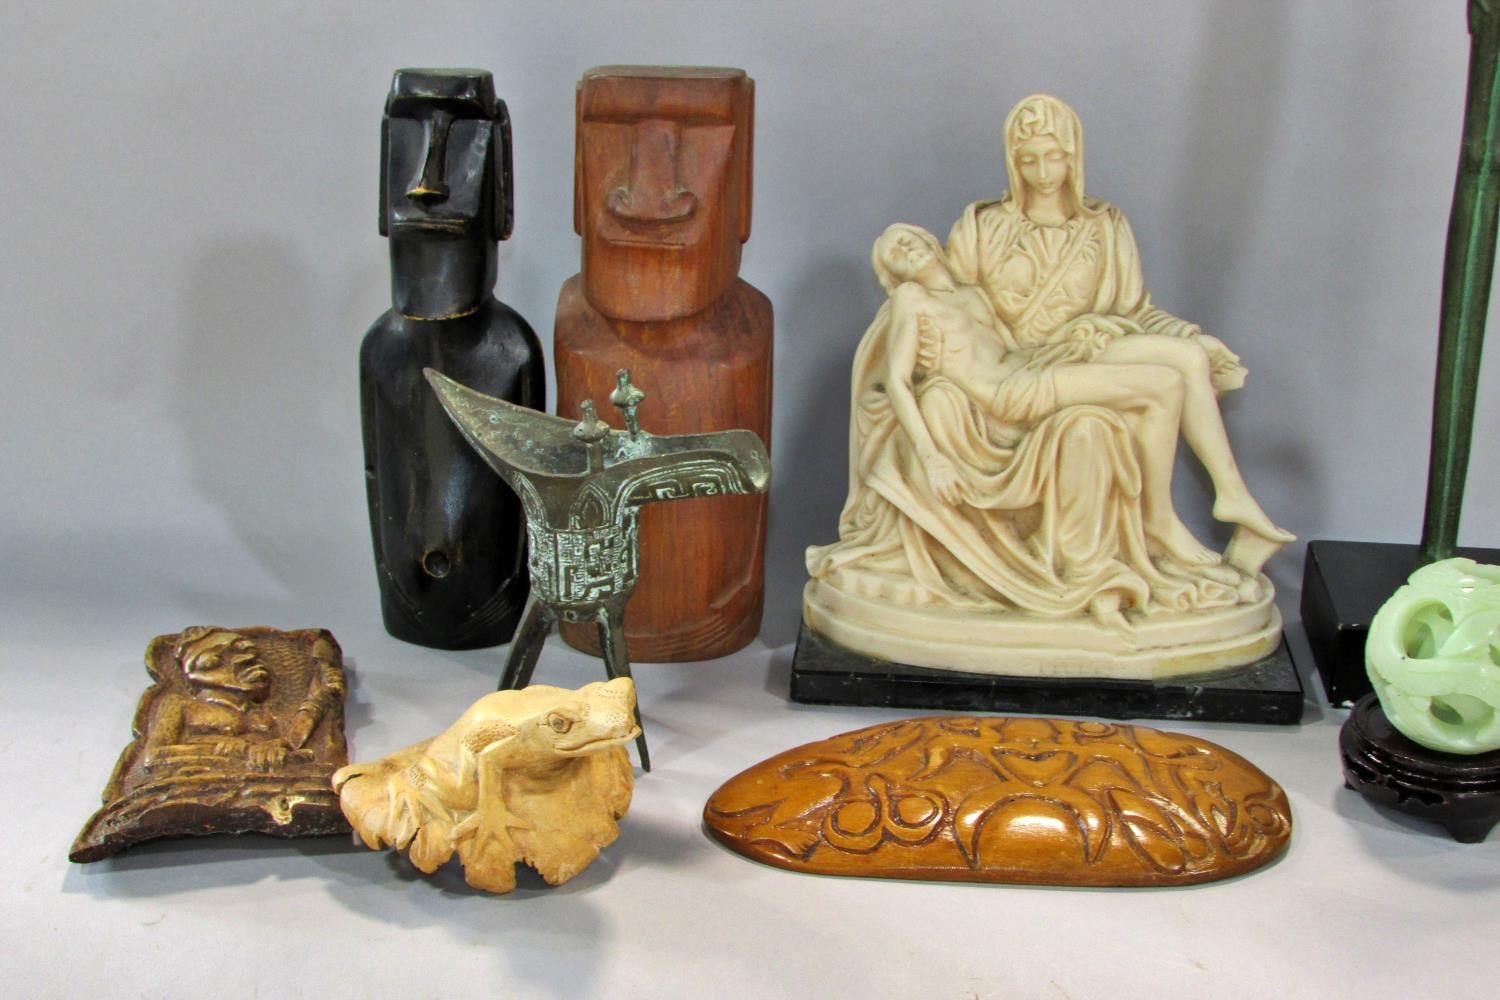 A box of worldwide souvenirs, including, Bernini’s Pieta, Easter Island Heads, Chinese Libation Cup, - Image 2 of 3